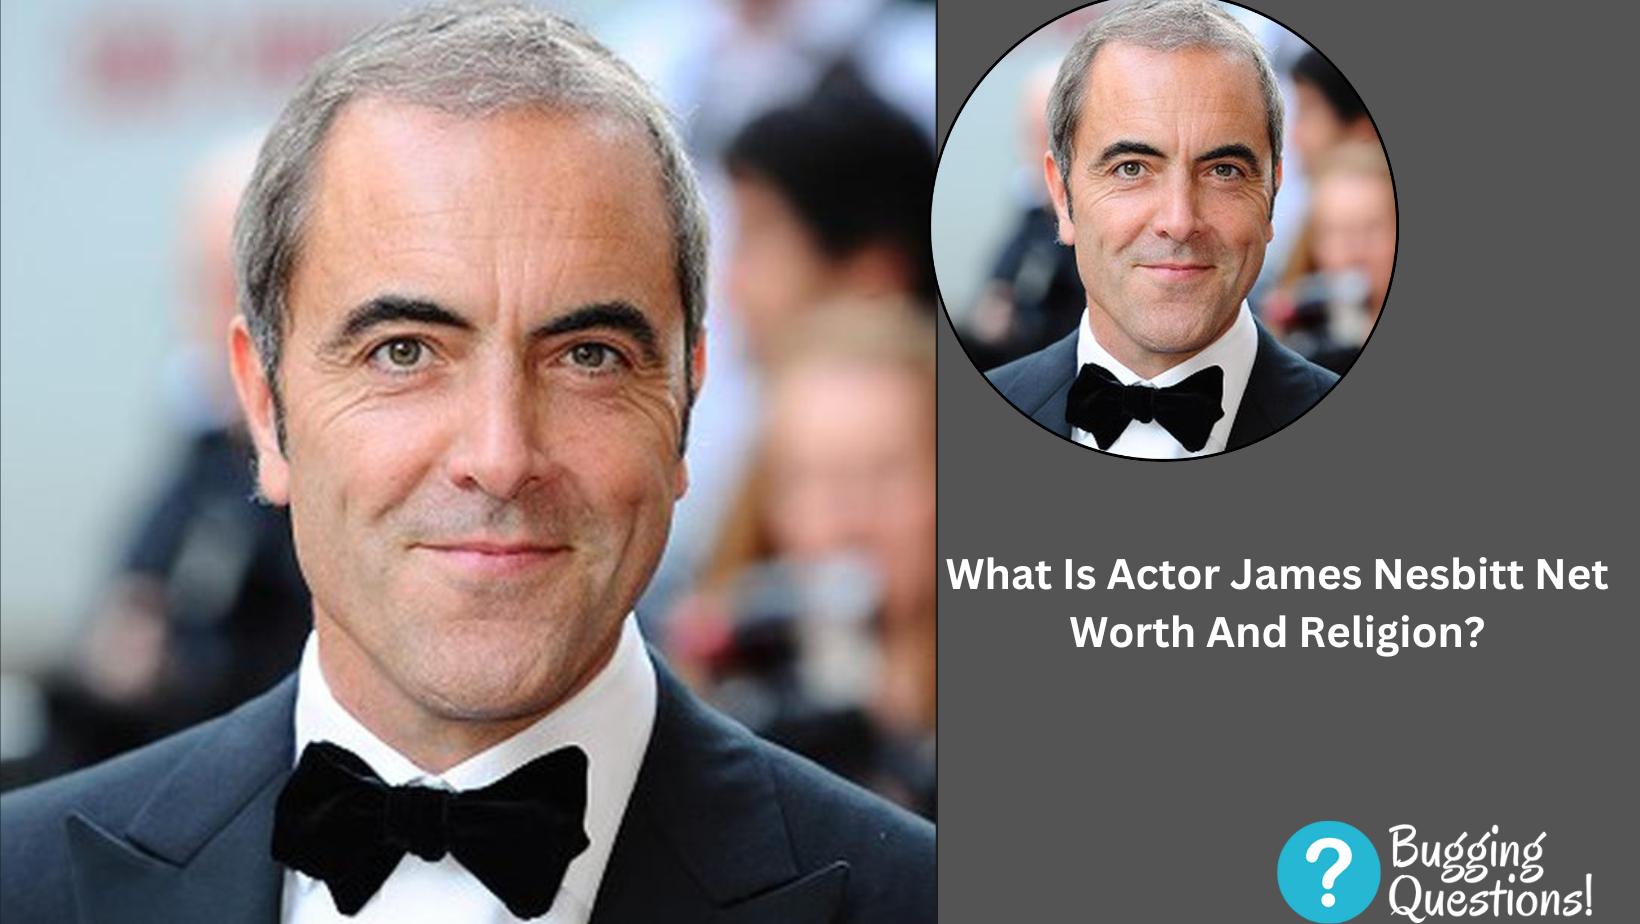 What Is Actor James Nesbitt Net Worth And Religion?